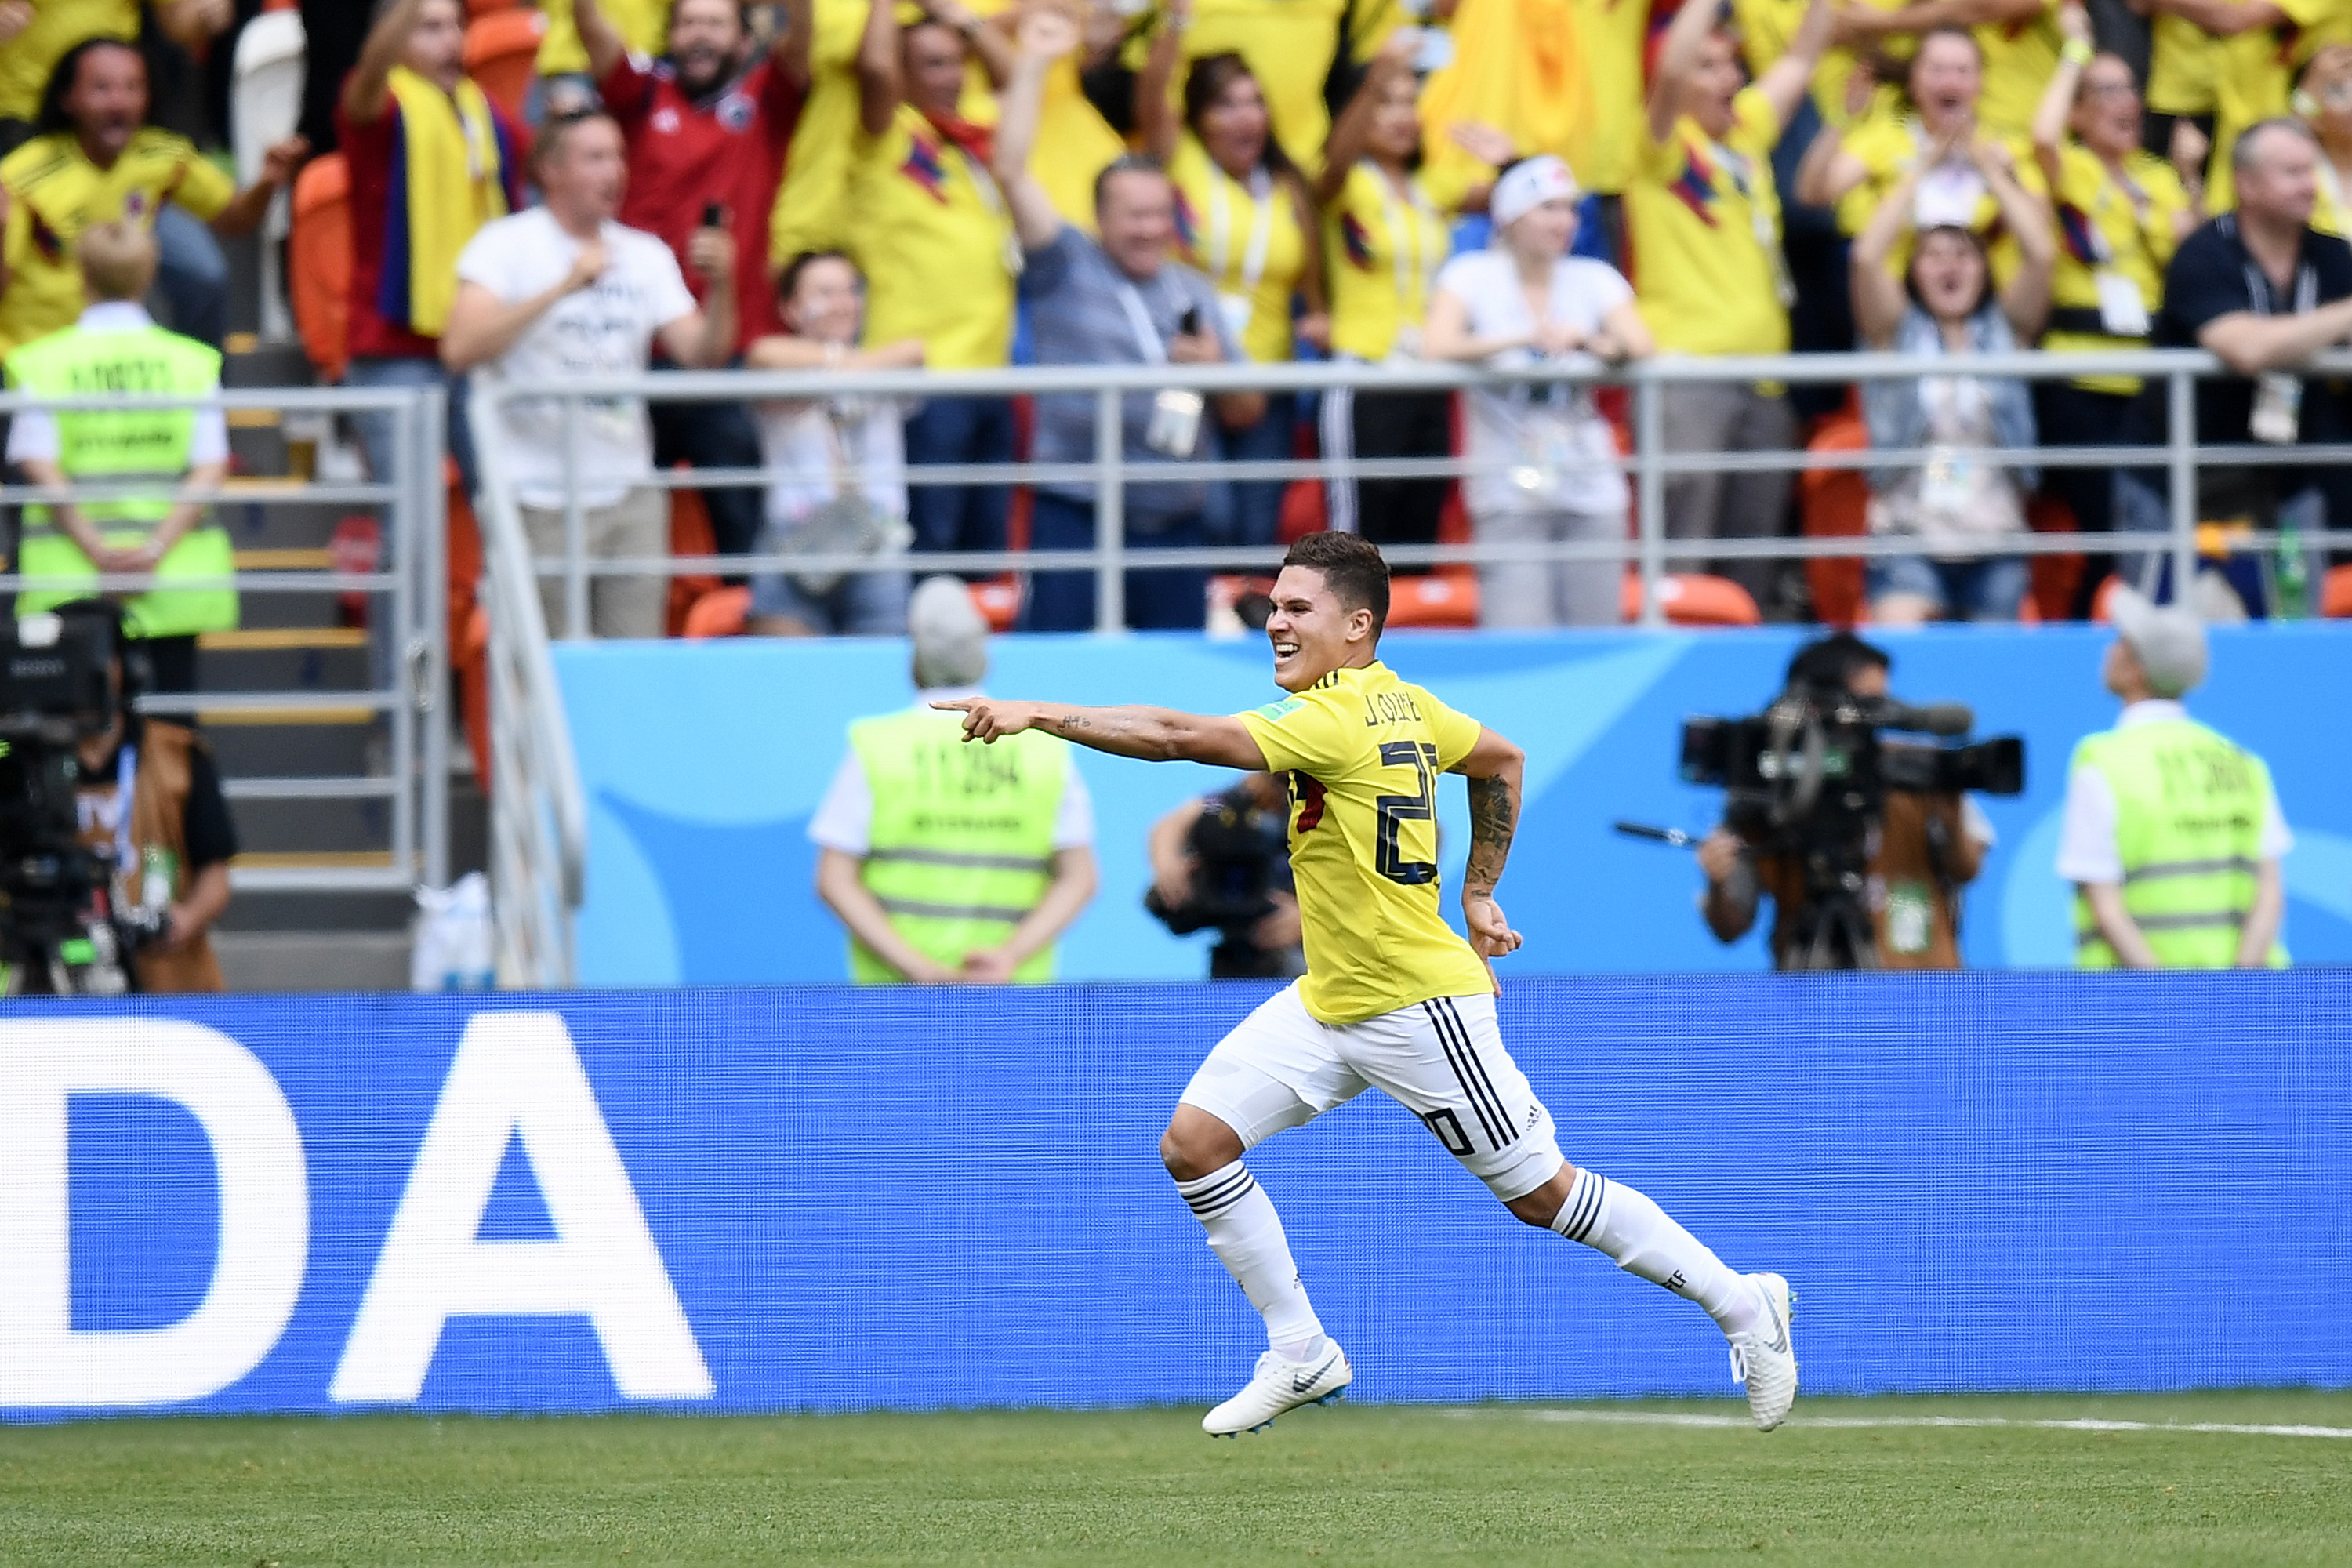 SARANSK, RUSSIA - JUNE 19:  Juan Quintero of Colombia celebrates after scoring his team's first goal during the 2018 FIFA World Cup Russia group H match between Colombia and Japan at Mordovia Arena on June 19, 2018 in Saransk, Russia.  (Photo by Carl Court/Getty Images)